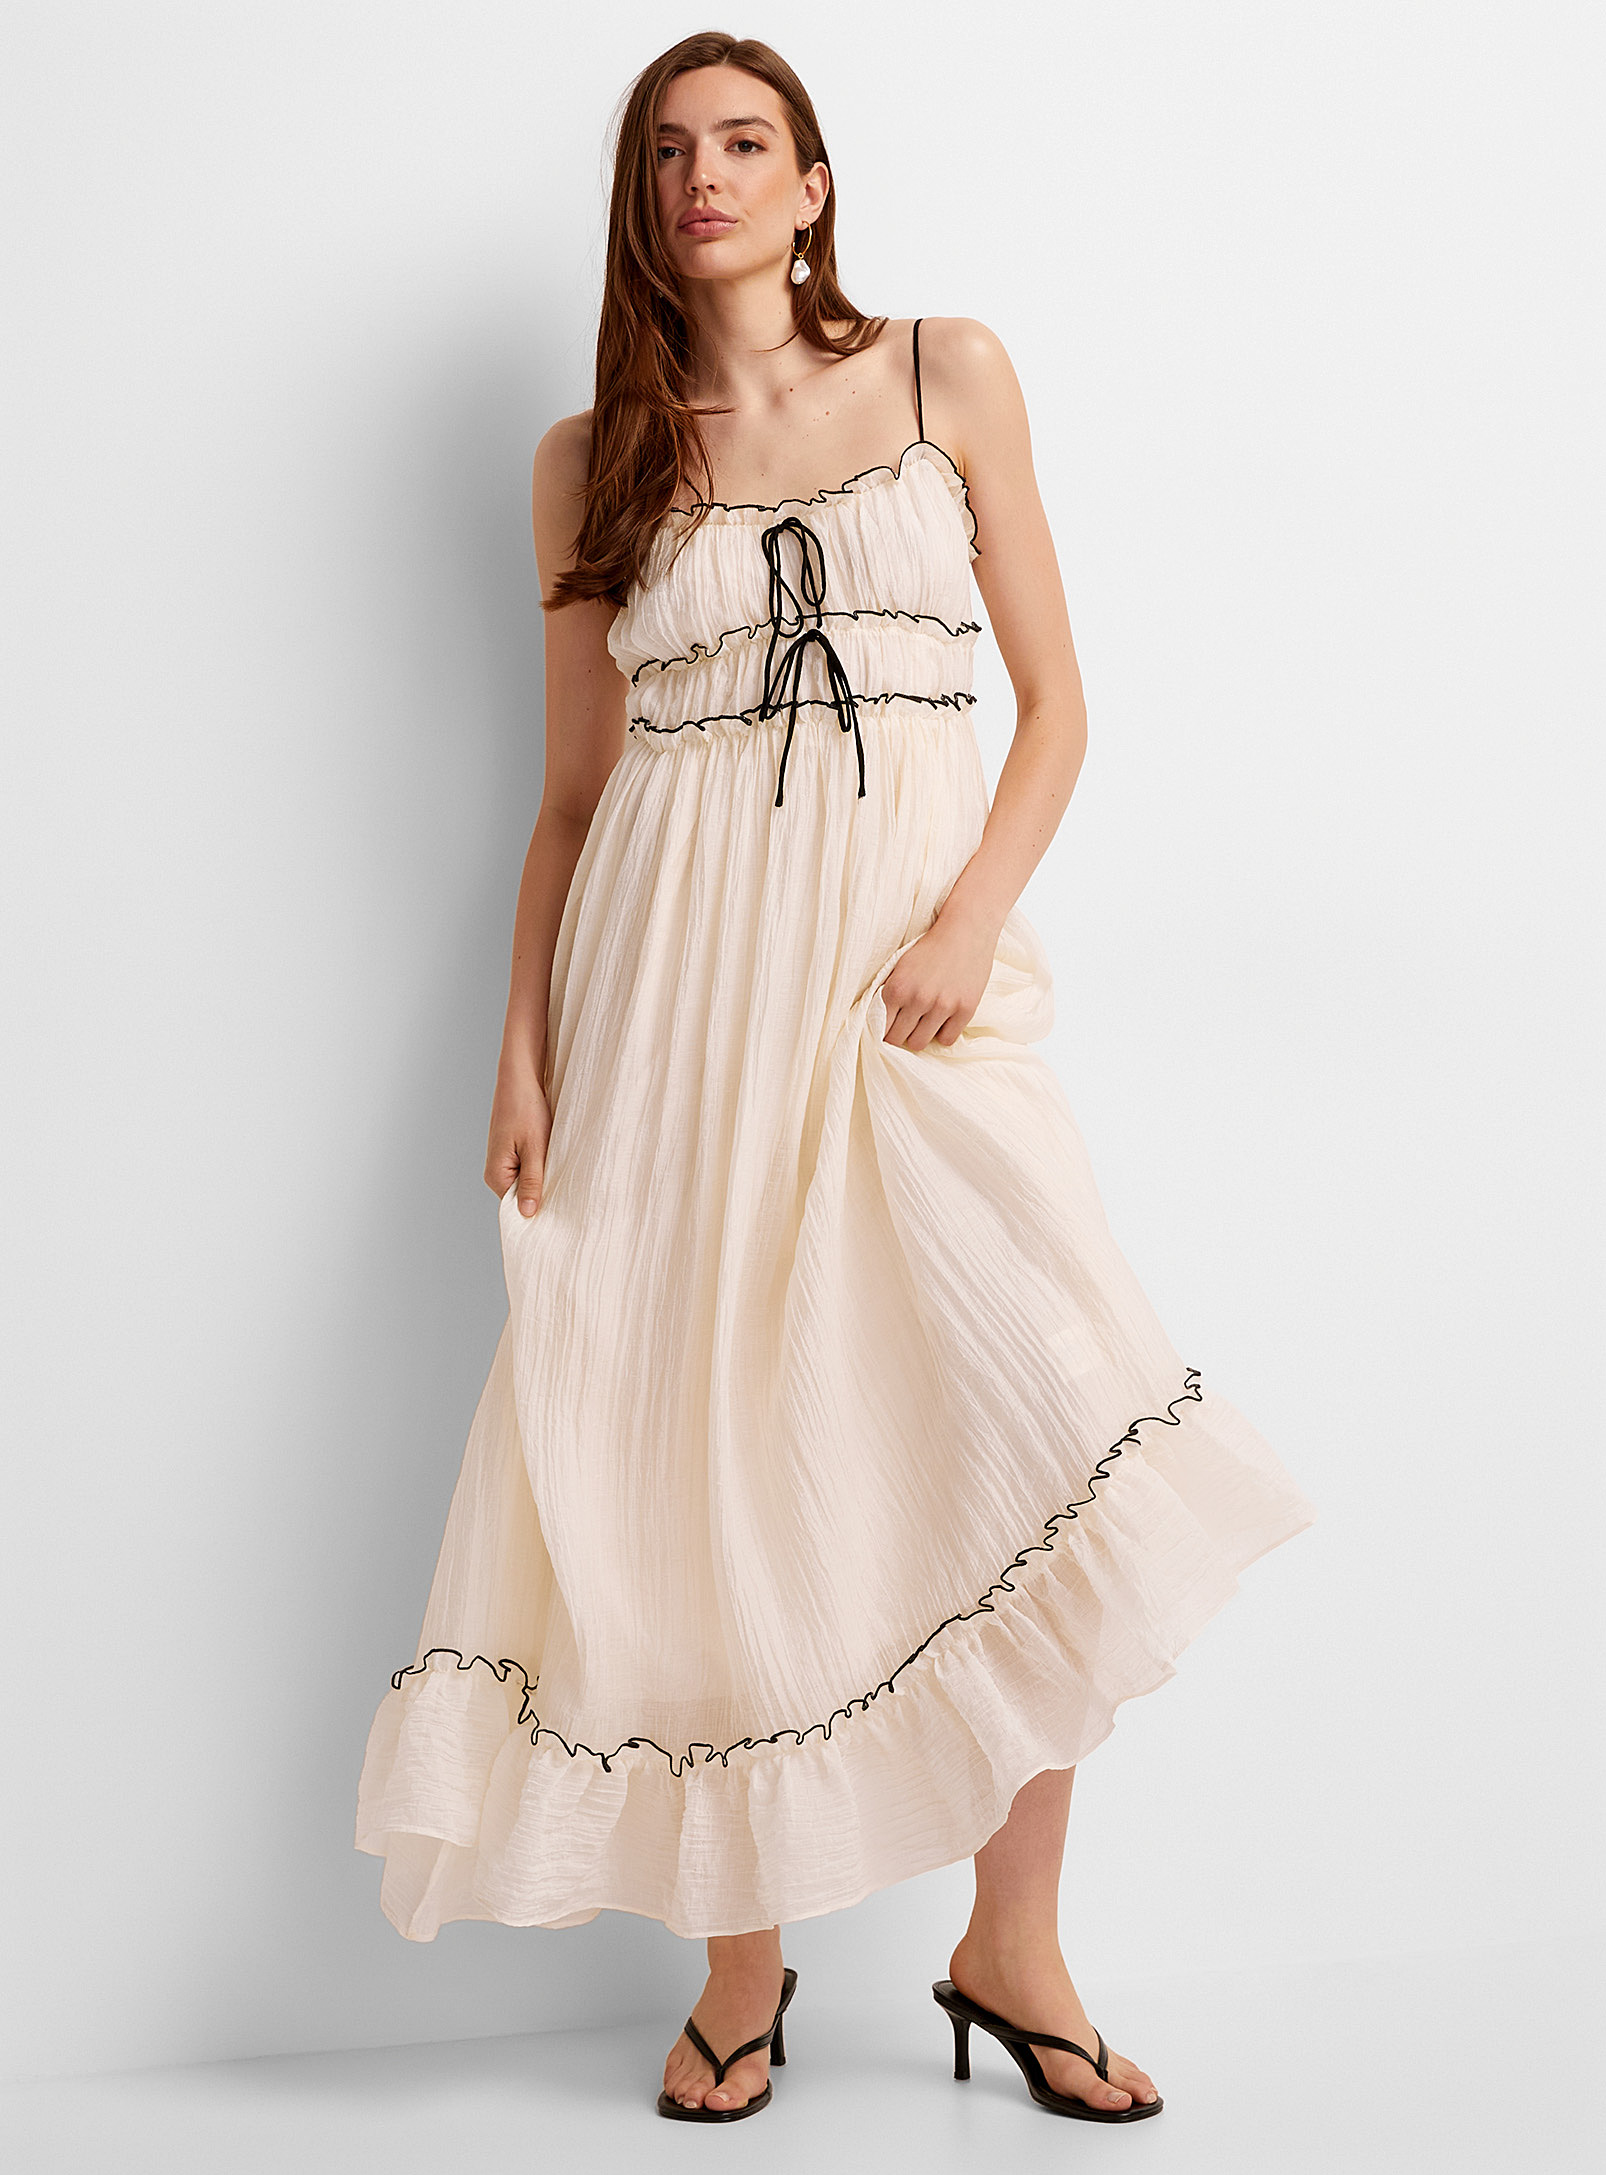 Icone Wrinkled Voile Maxi Peasant Dress In Black And White